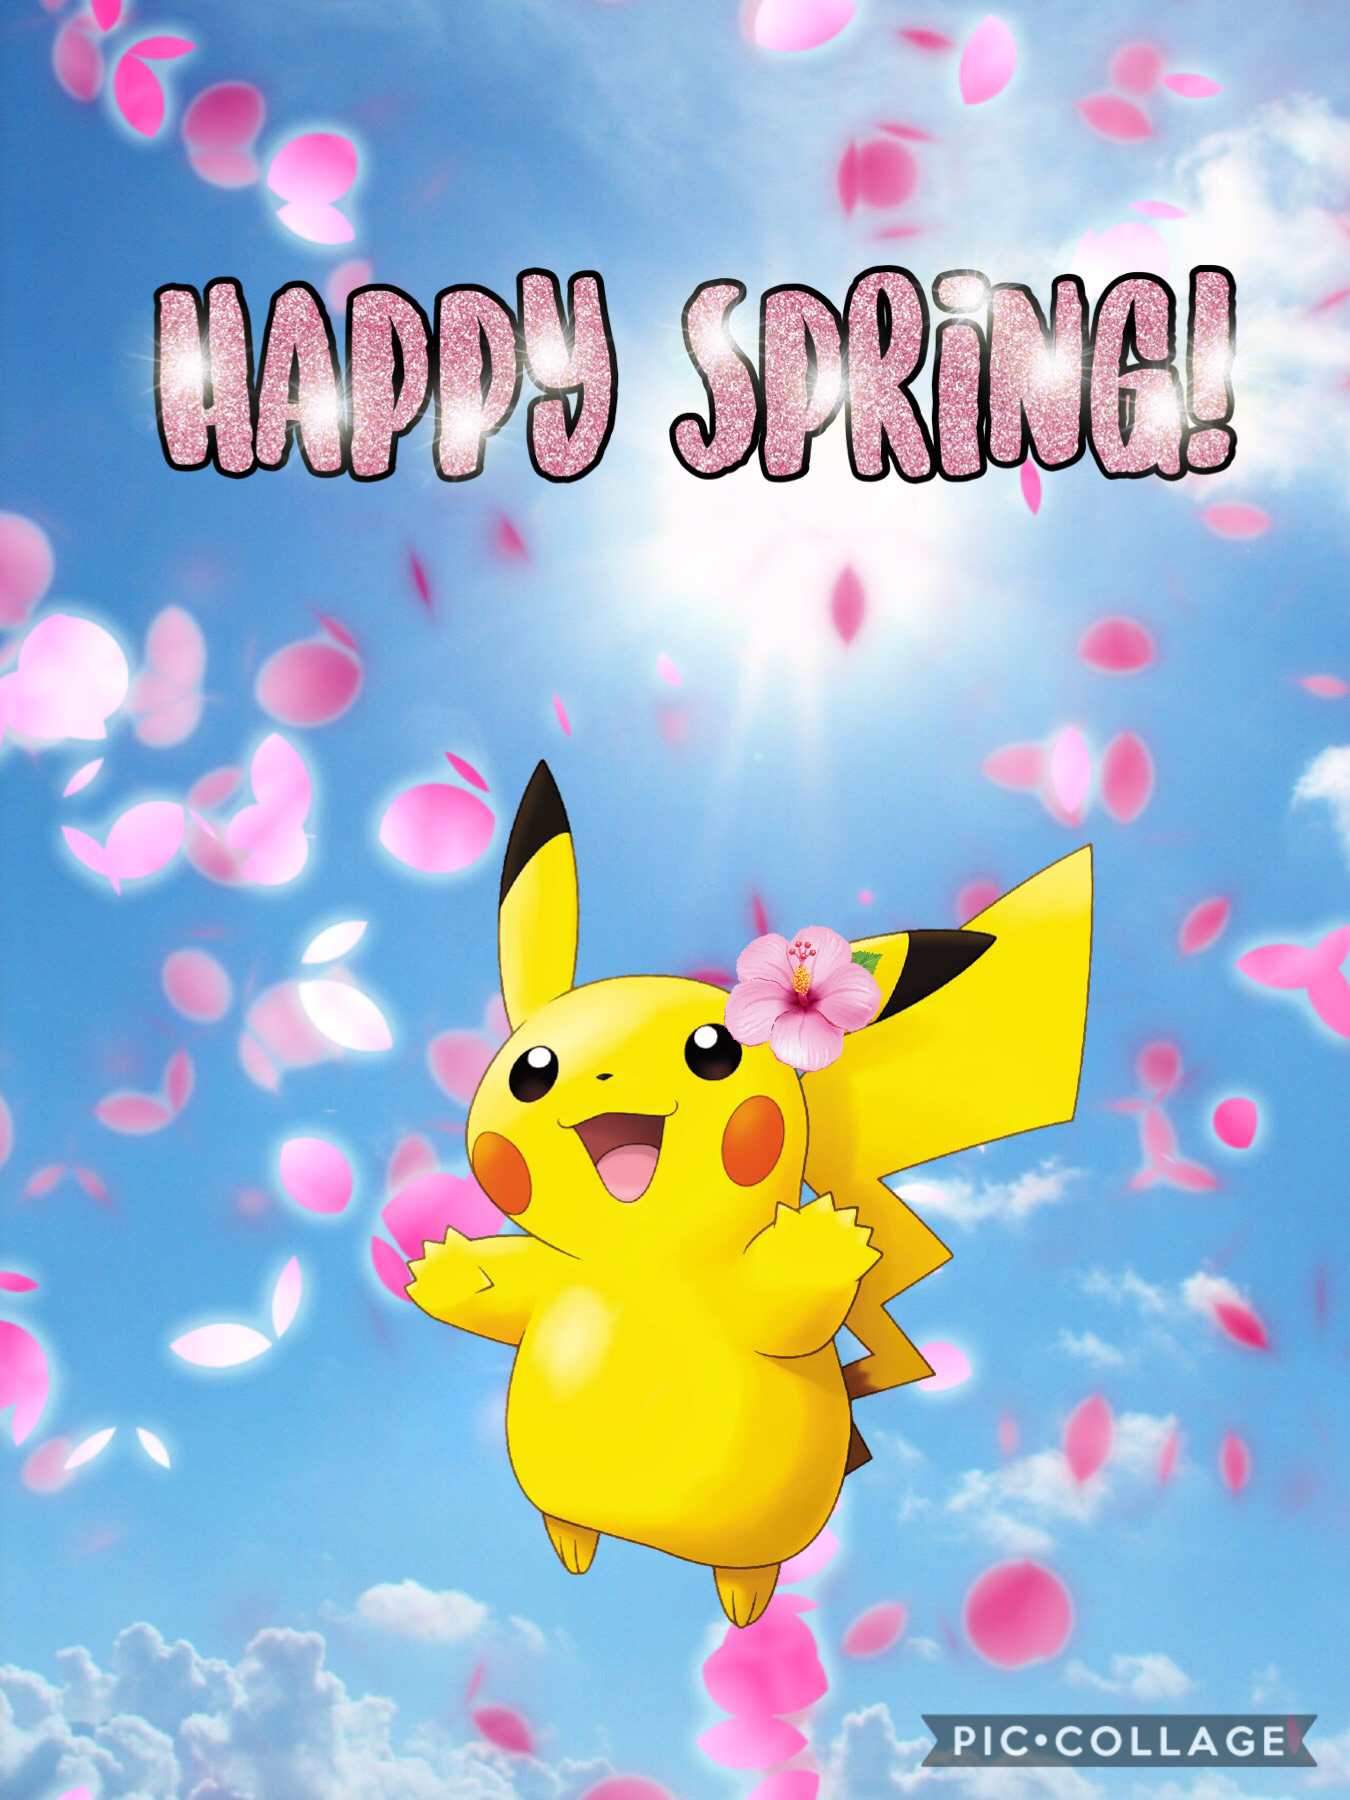 It’s spring time!